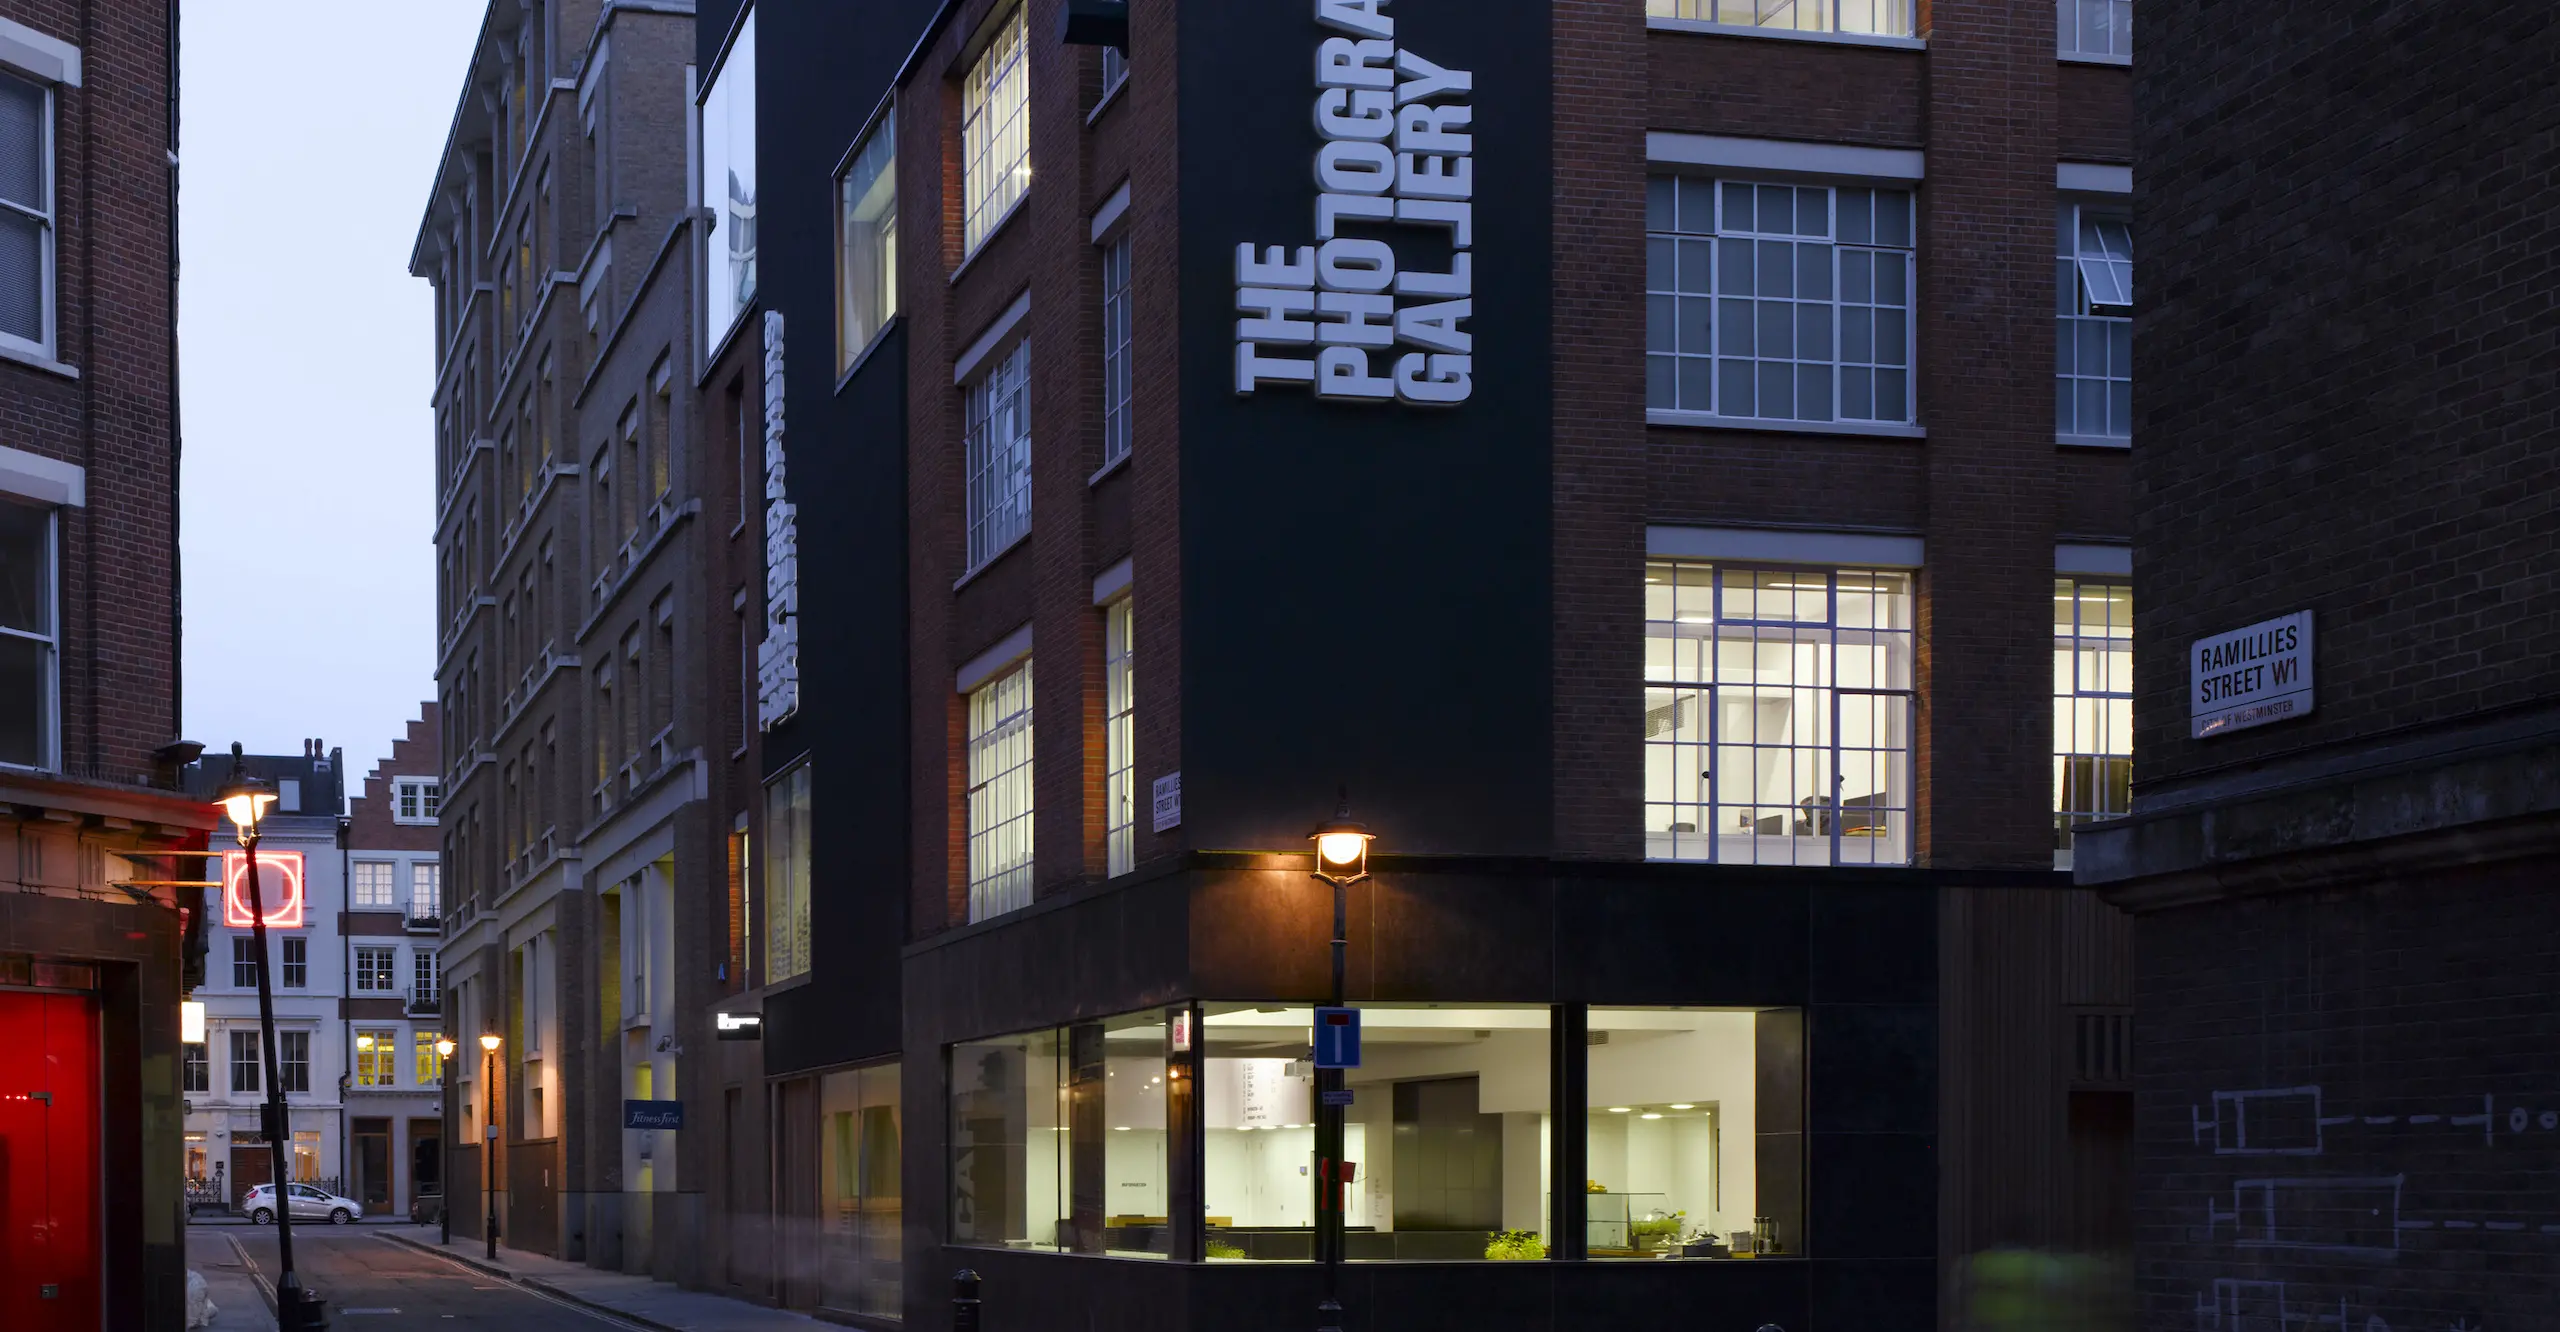 A photograph of the exterior of The Photographers' Gallery at dusk.